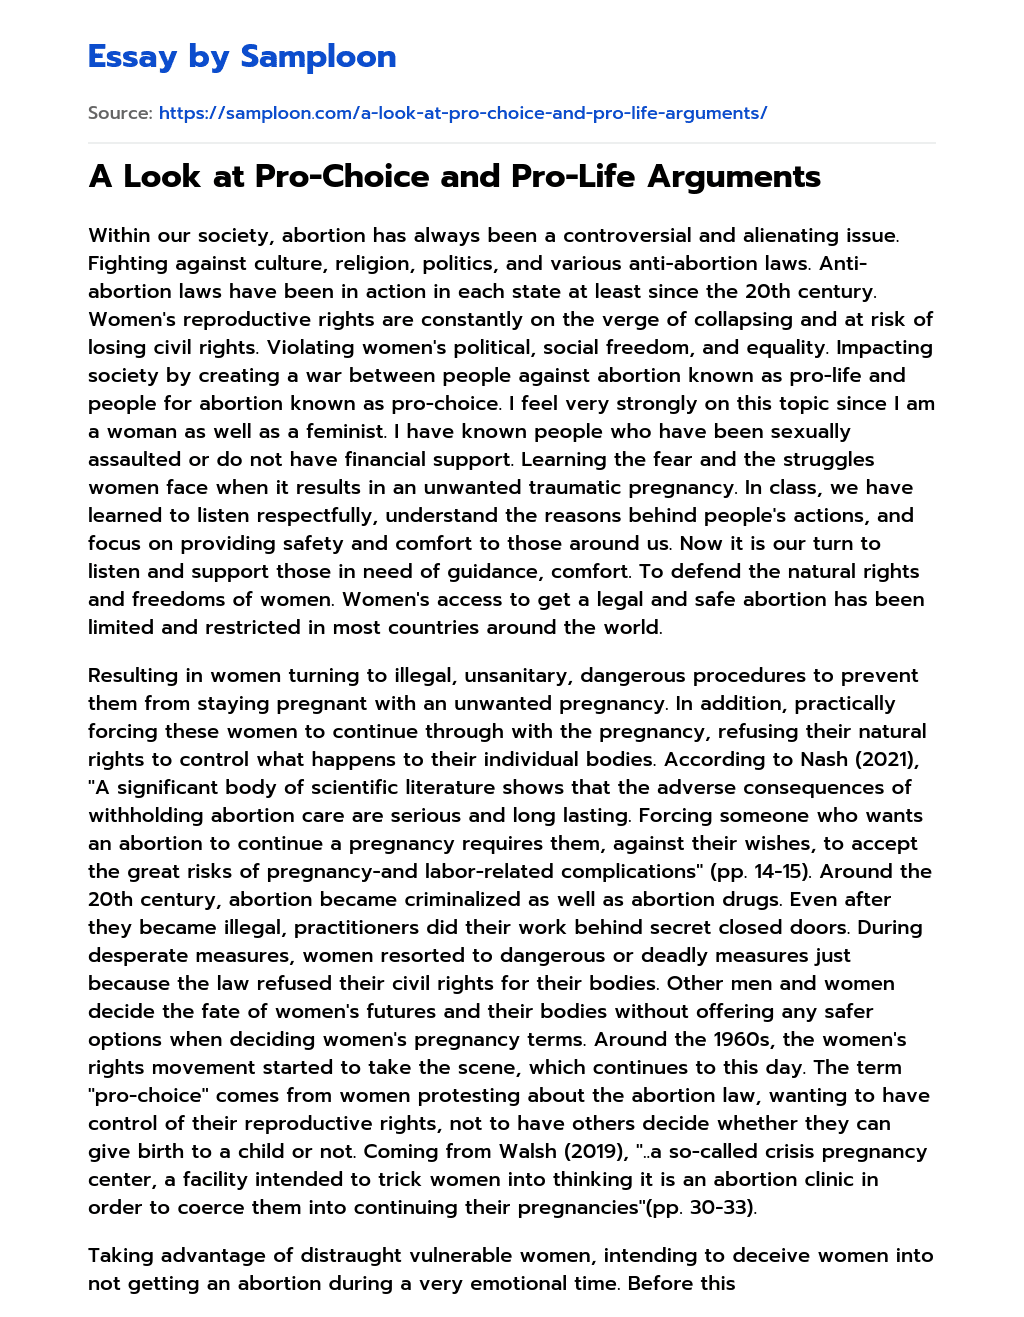 A Look at Pro-Choice and Pro-Life Arguments essay